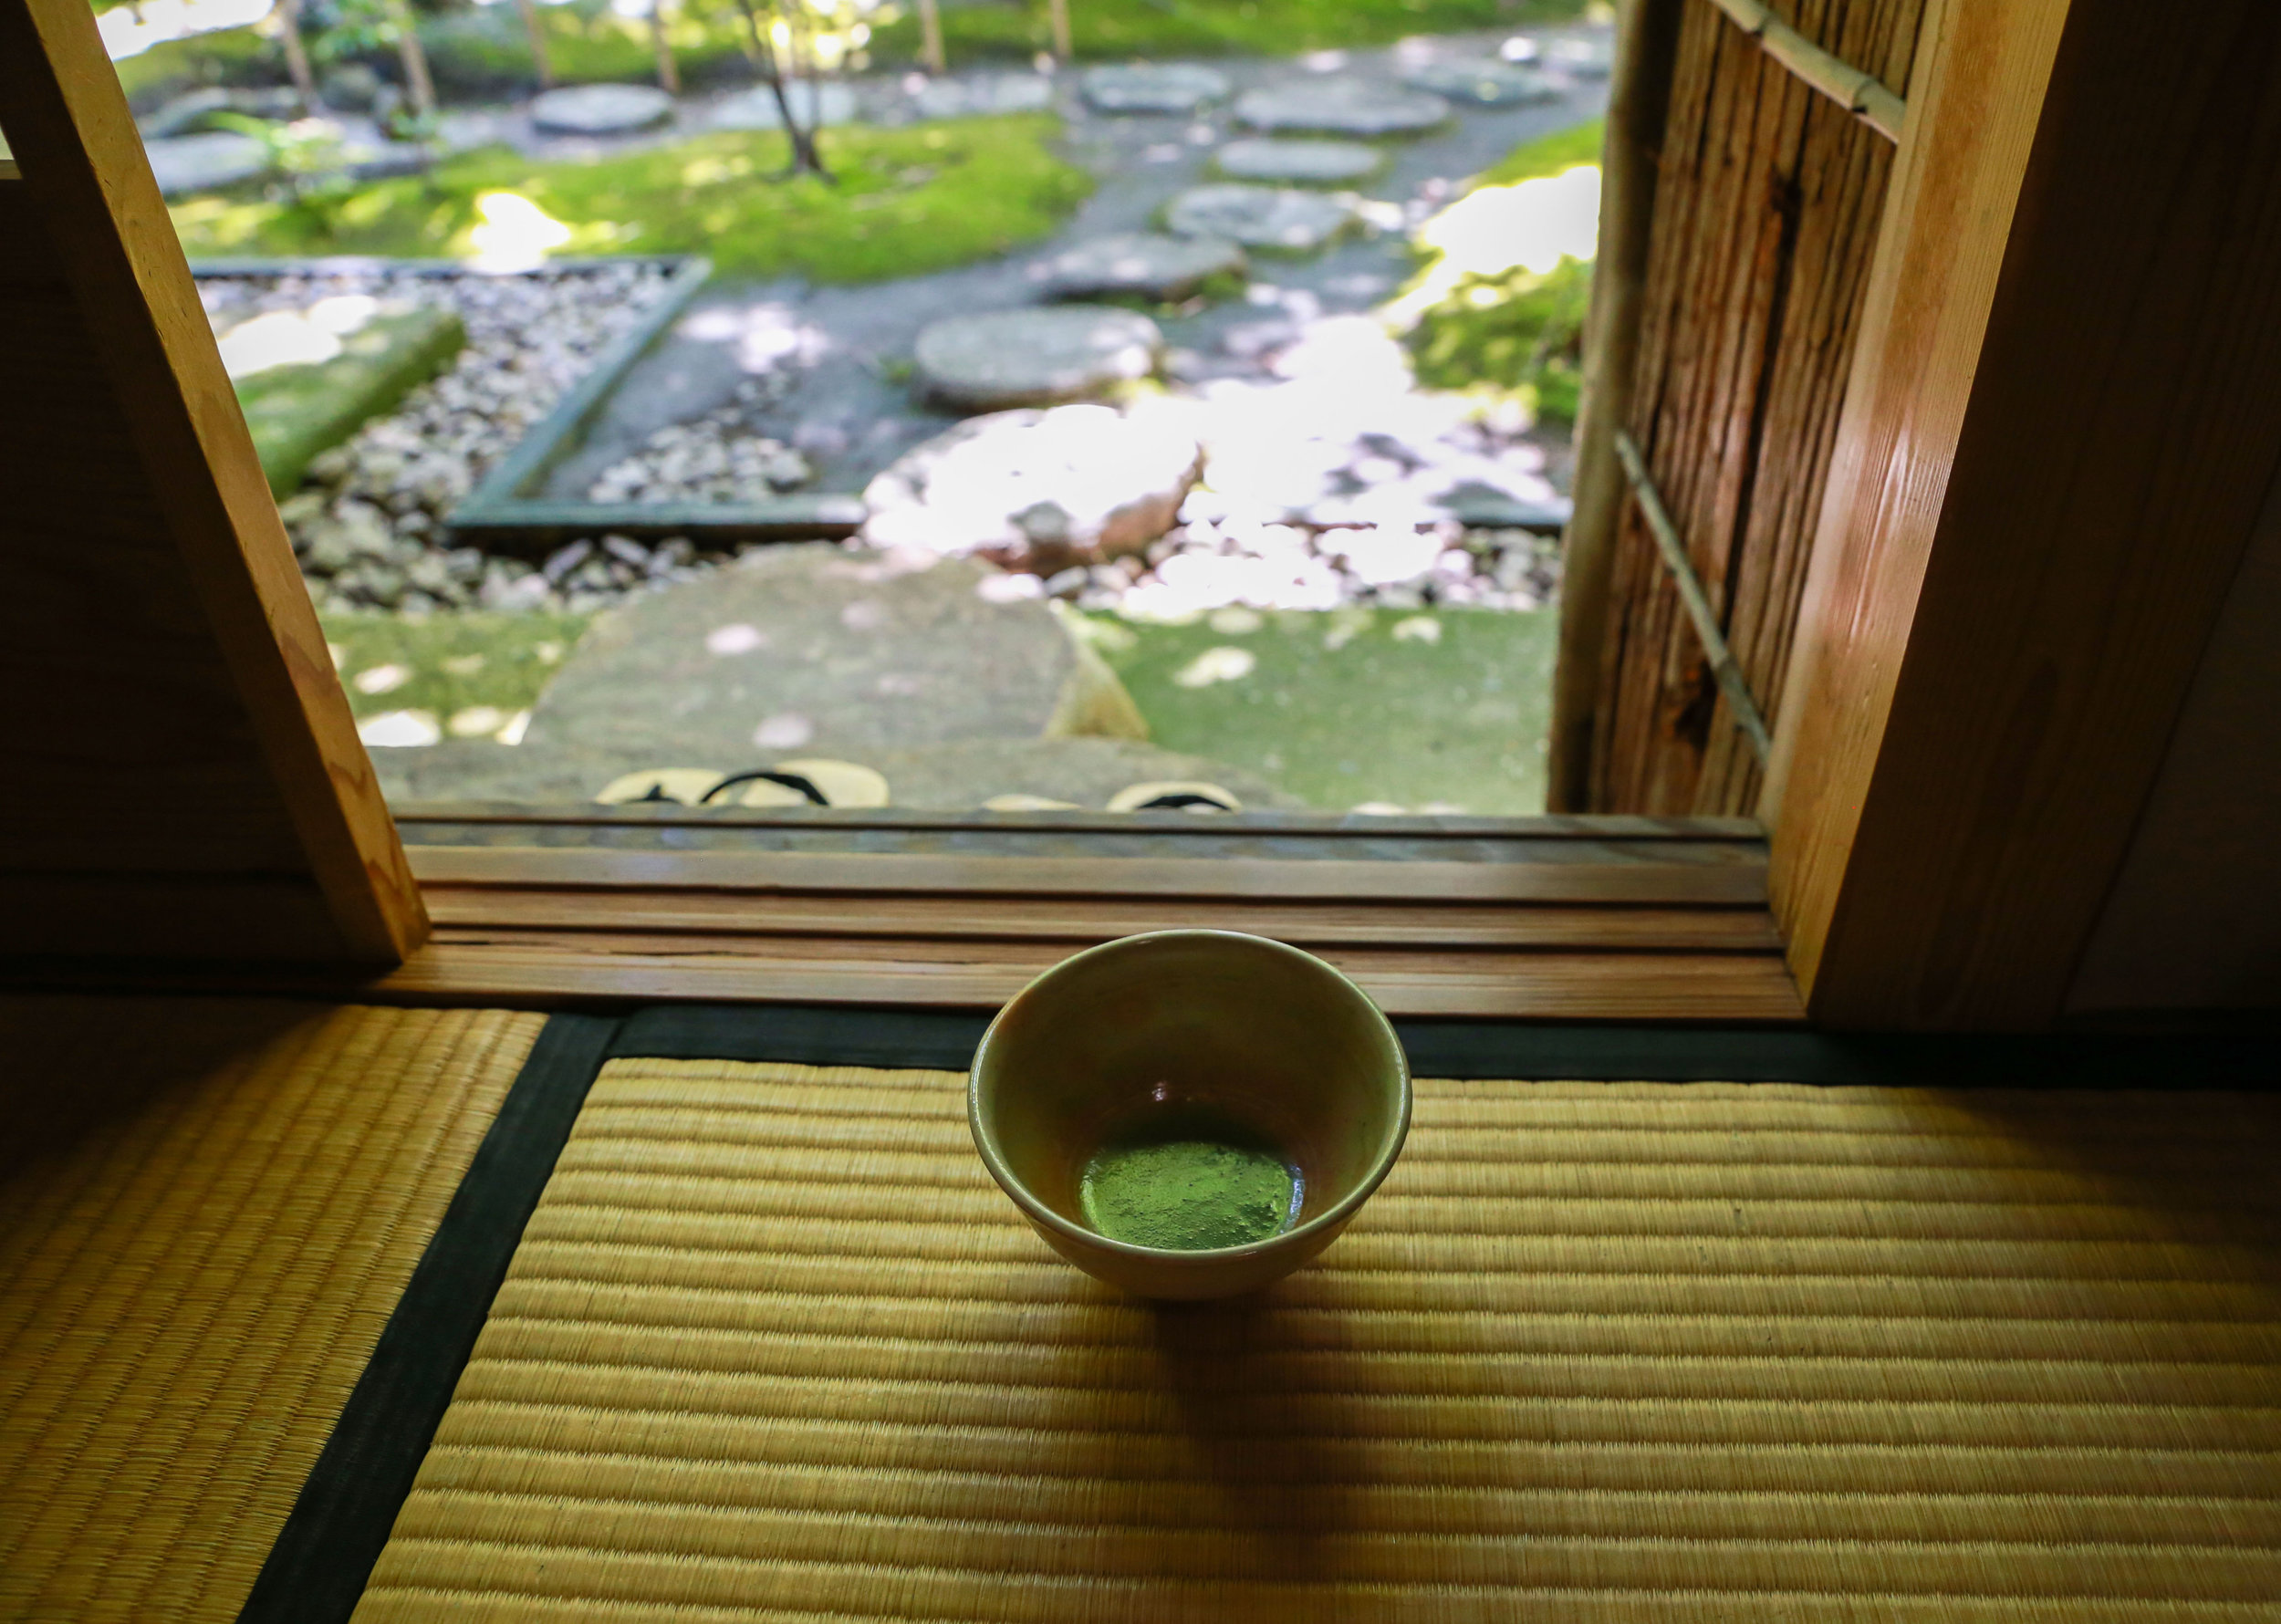  Matcha tea sits in a “chashitsu” or traditional tea room in the Rakusui-en used to greet visitors in tea ceremony in Fukuoka, Japan, June 22, 2018. 